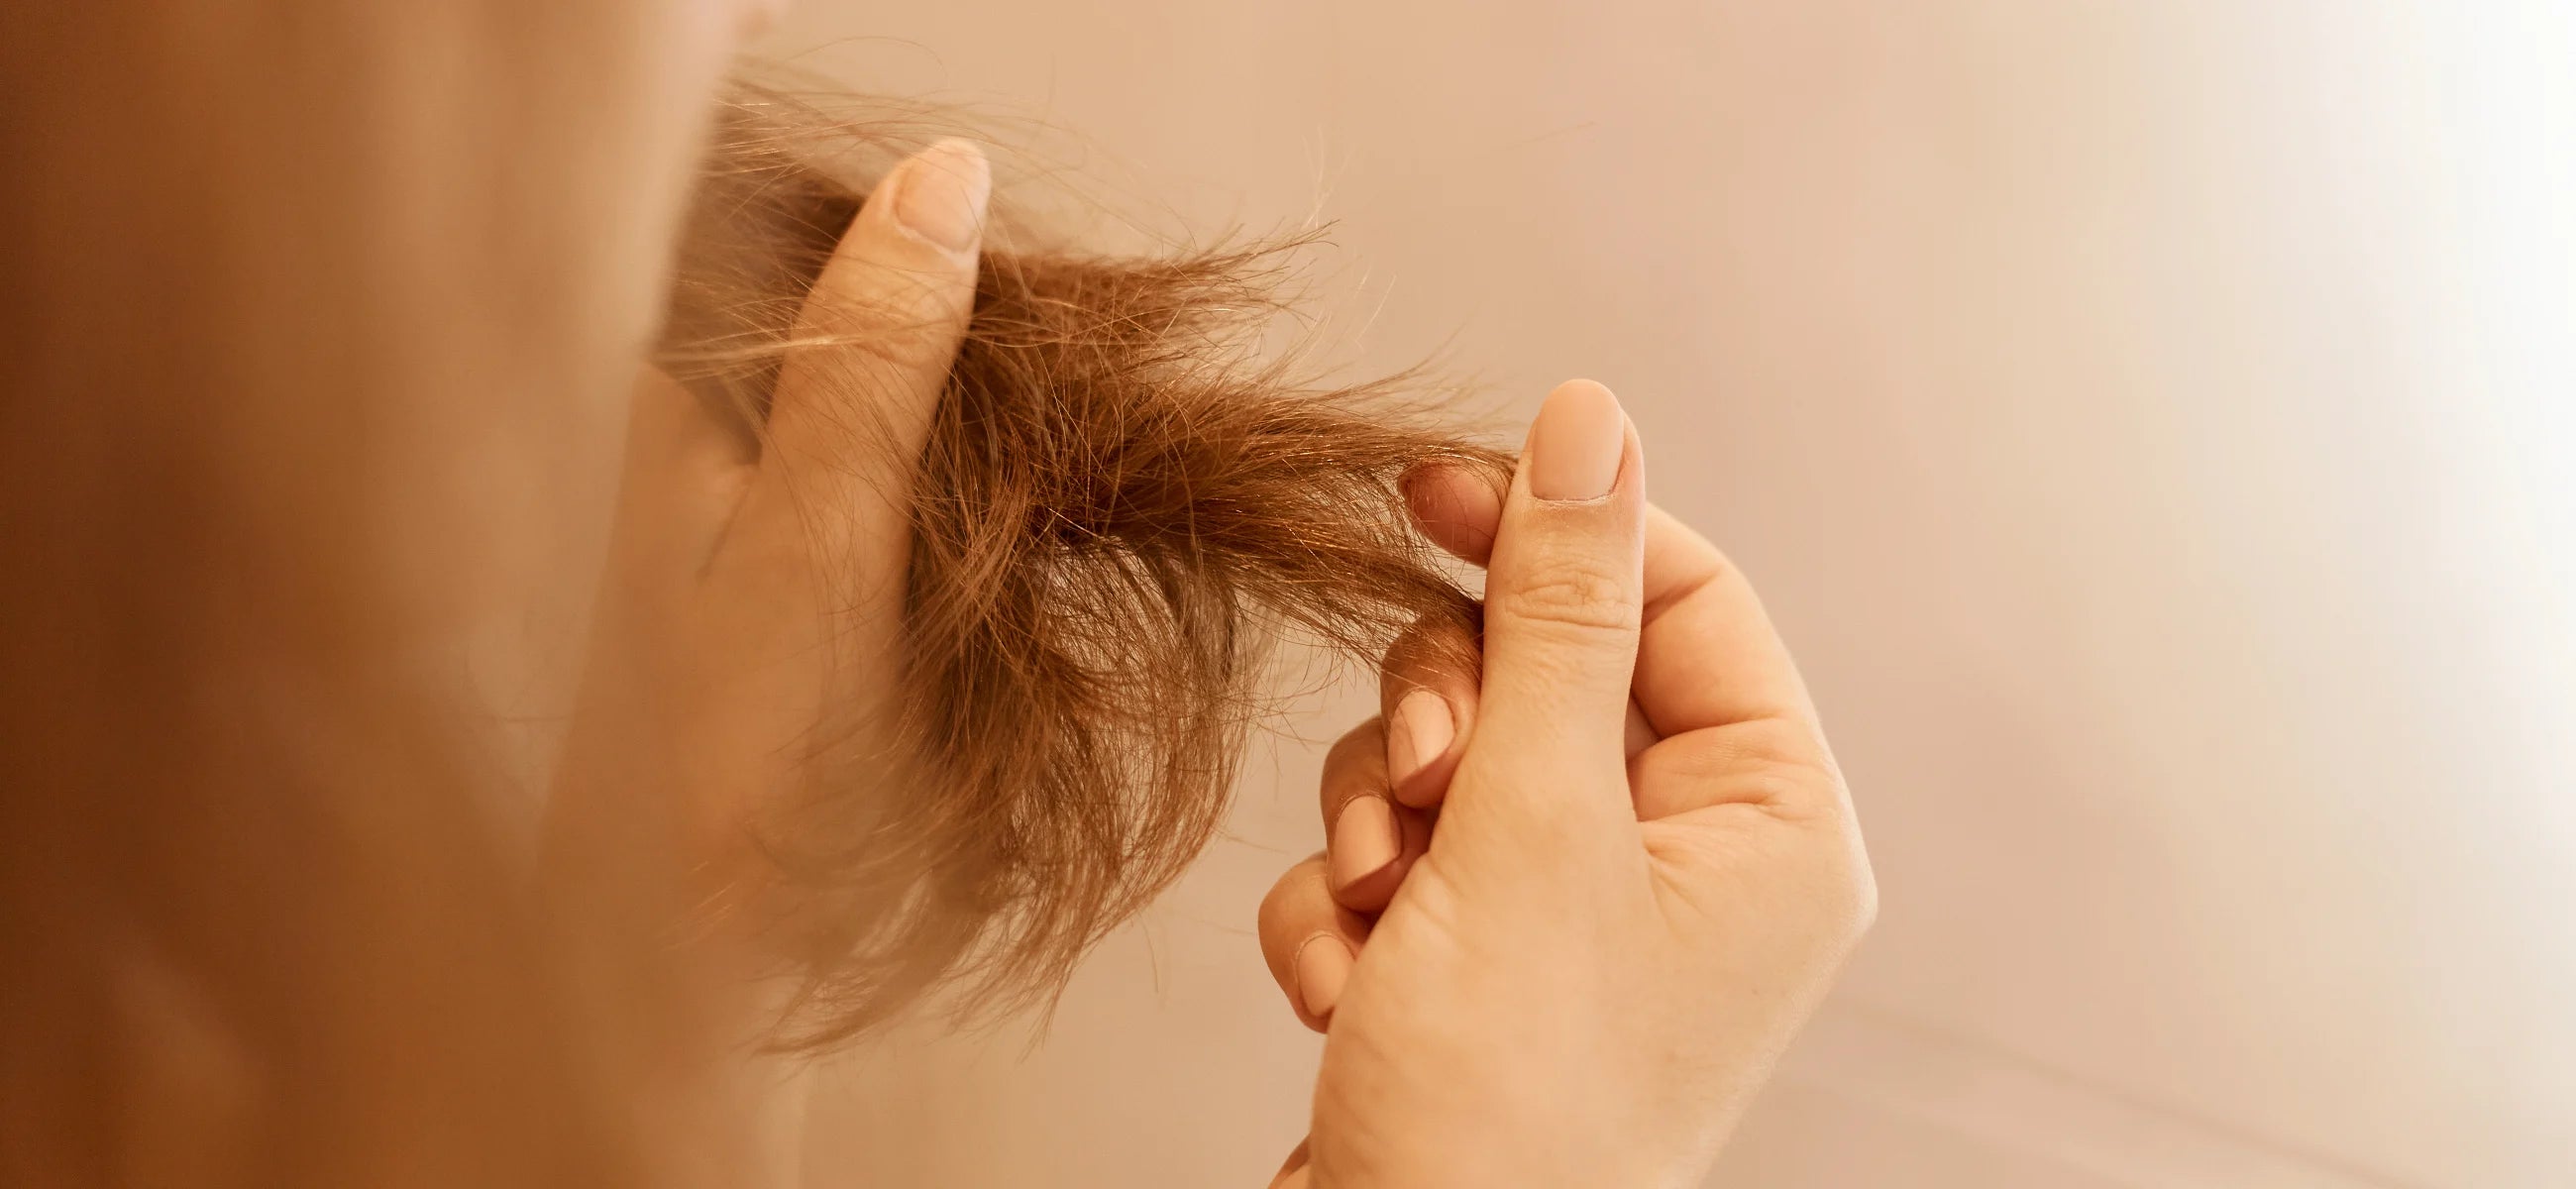 Dry brittle hair: What causes it & how to prevent